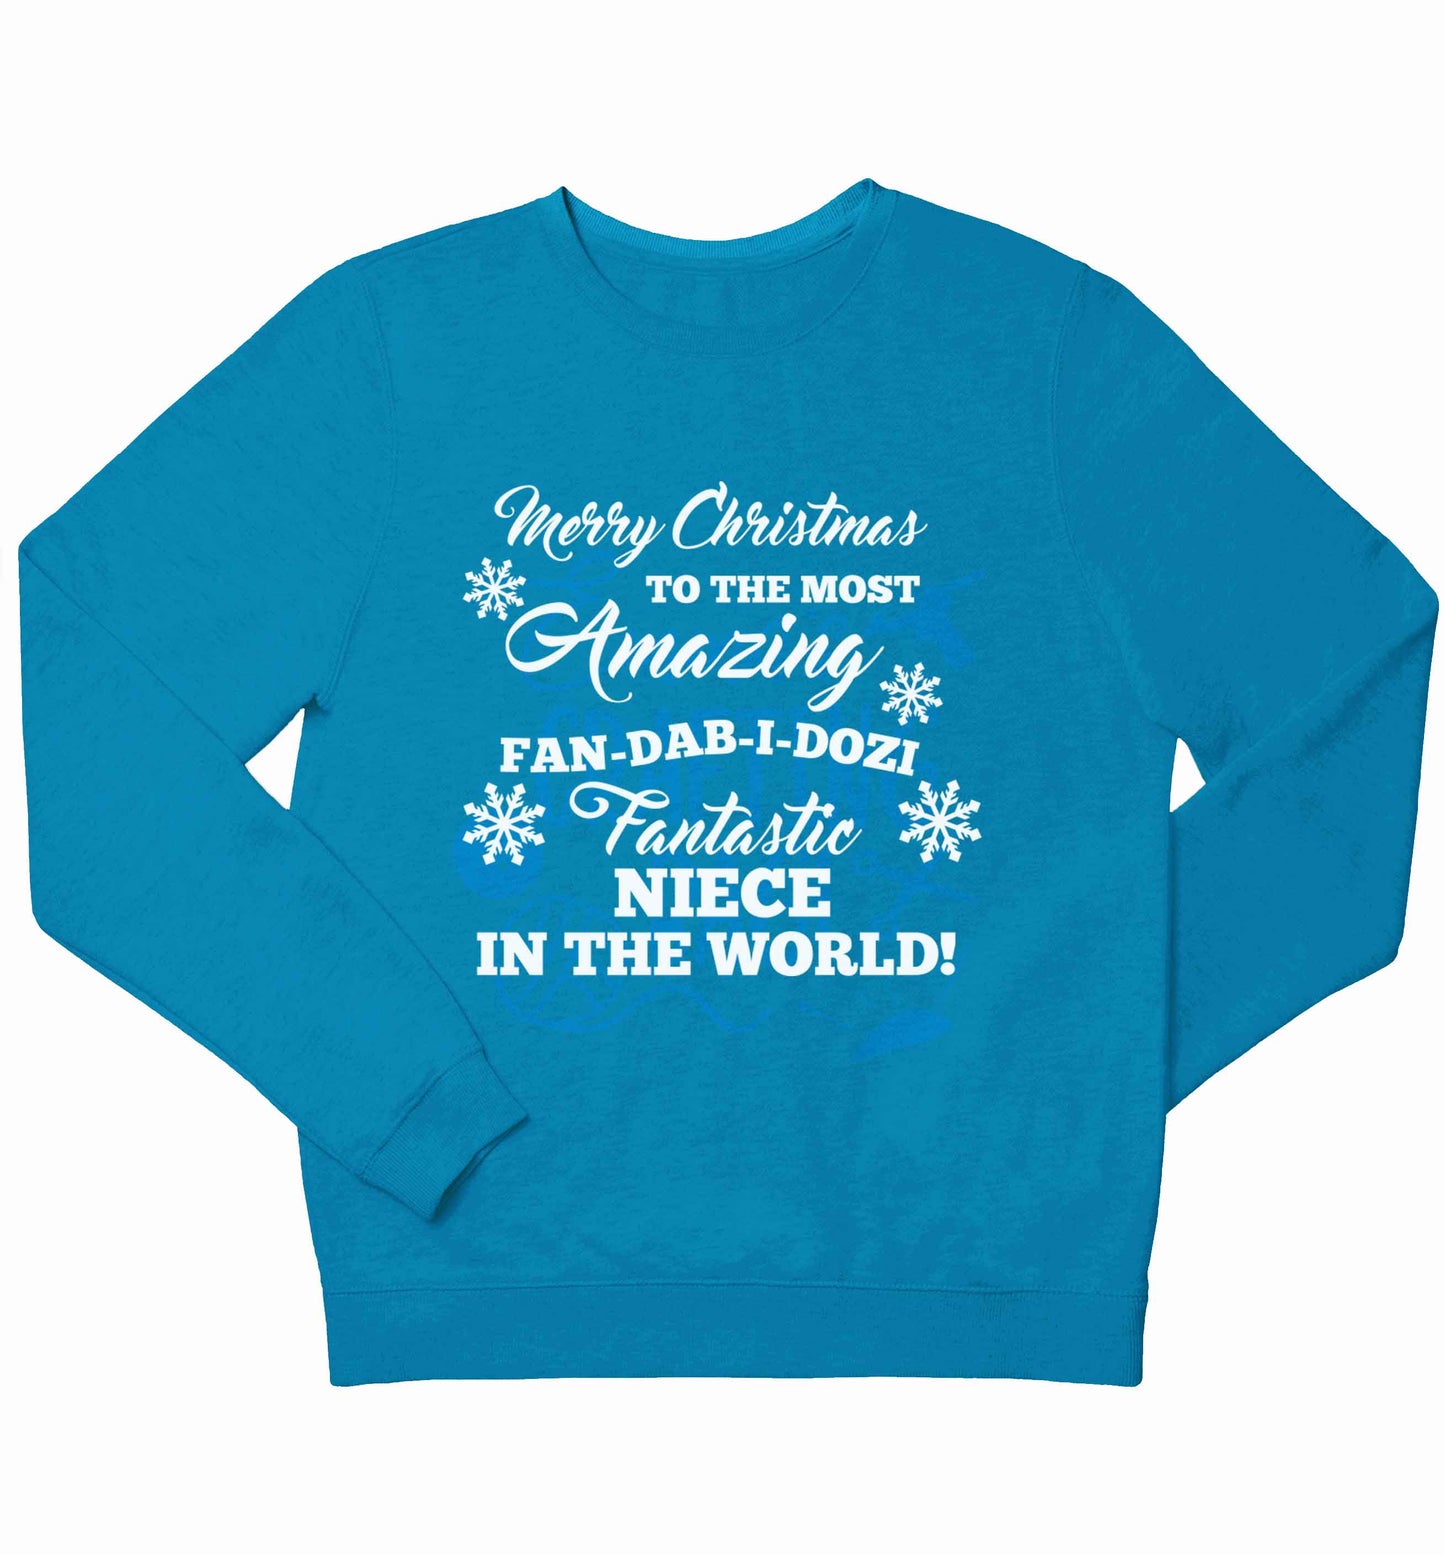 Merry Christmas to the most amazing fan-dab-i-dozi fantasic Niece in the world children's blue sweater 12-13 Years